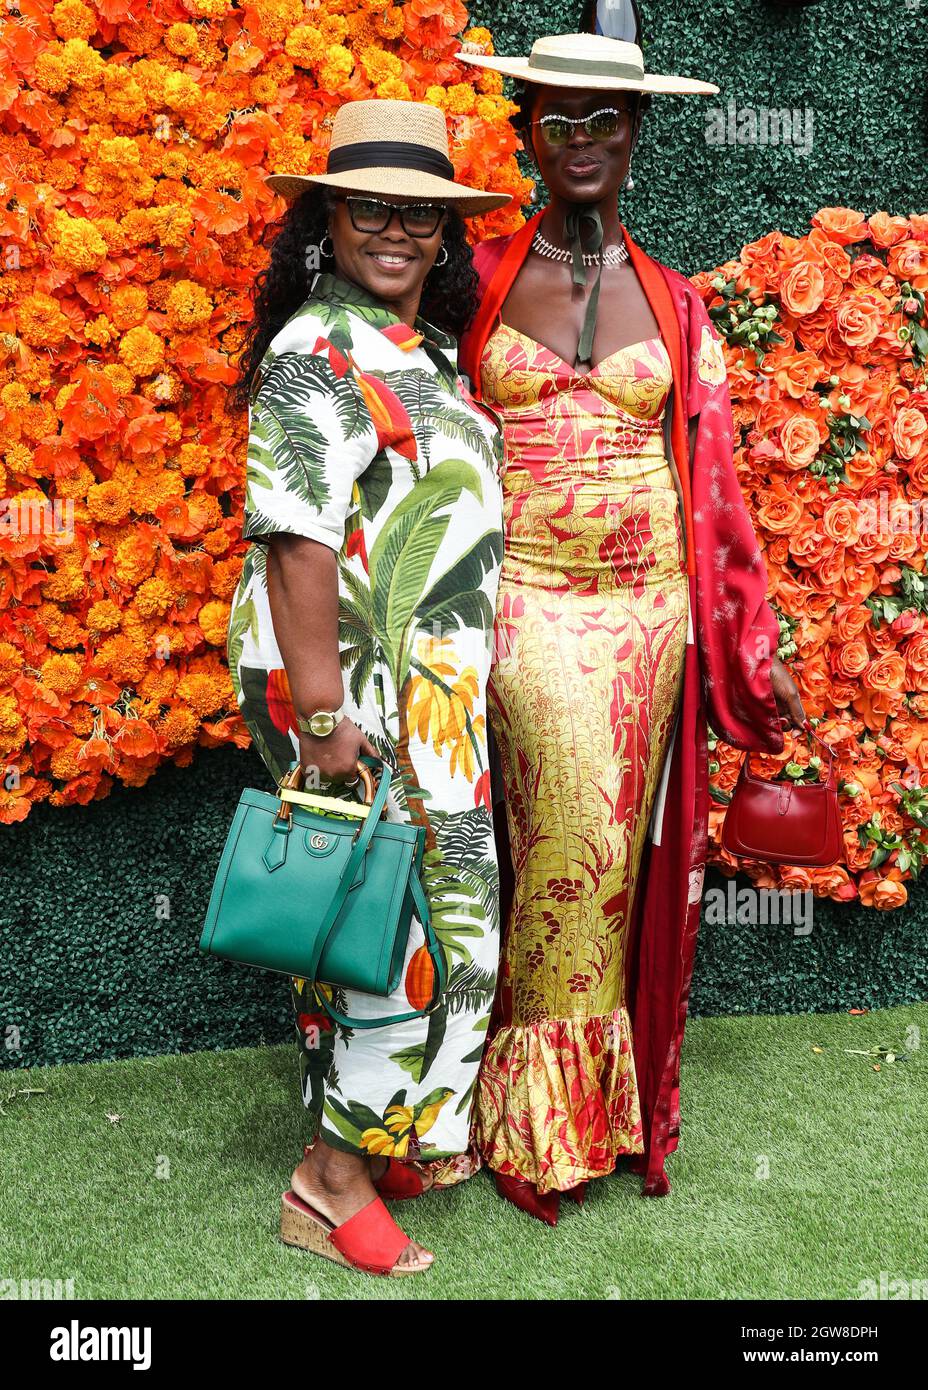 Pacific Palisades, United States. 02nd Oct, 2021. PACIFIC PALISADES, LOS ANGELES, CALIFORNIA, USA - OCTOBER 02: Actress Jodie Turner-Smith arrives at the Veuve Clicquot Polo Classic Los Angeles 2021 held at the Will Rogers State Historic Park on October 2, 2021 in Pacific Palisades, Los Angeles, California, United States. (Photo by Xavier Collin/Image Press Agency/Sipa USA) Credit: Sipa USA/Alamy Live News Stock Photo